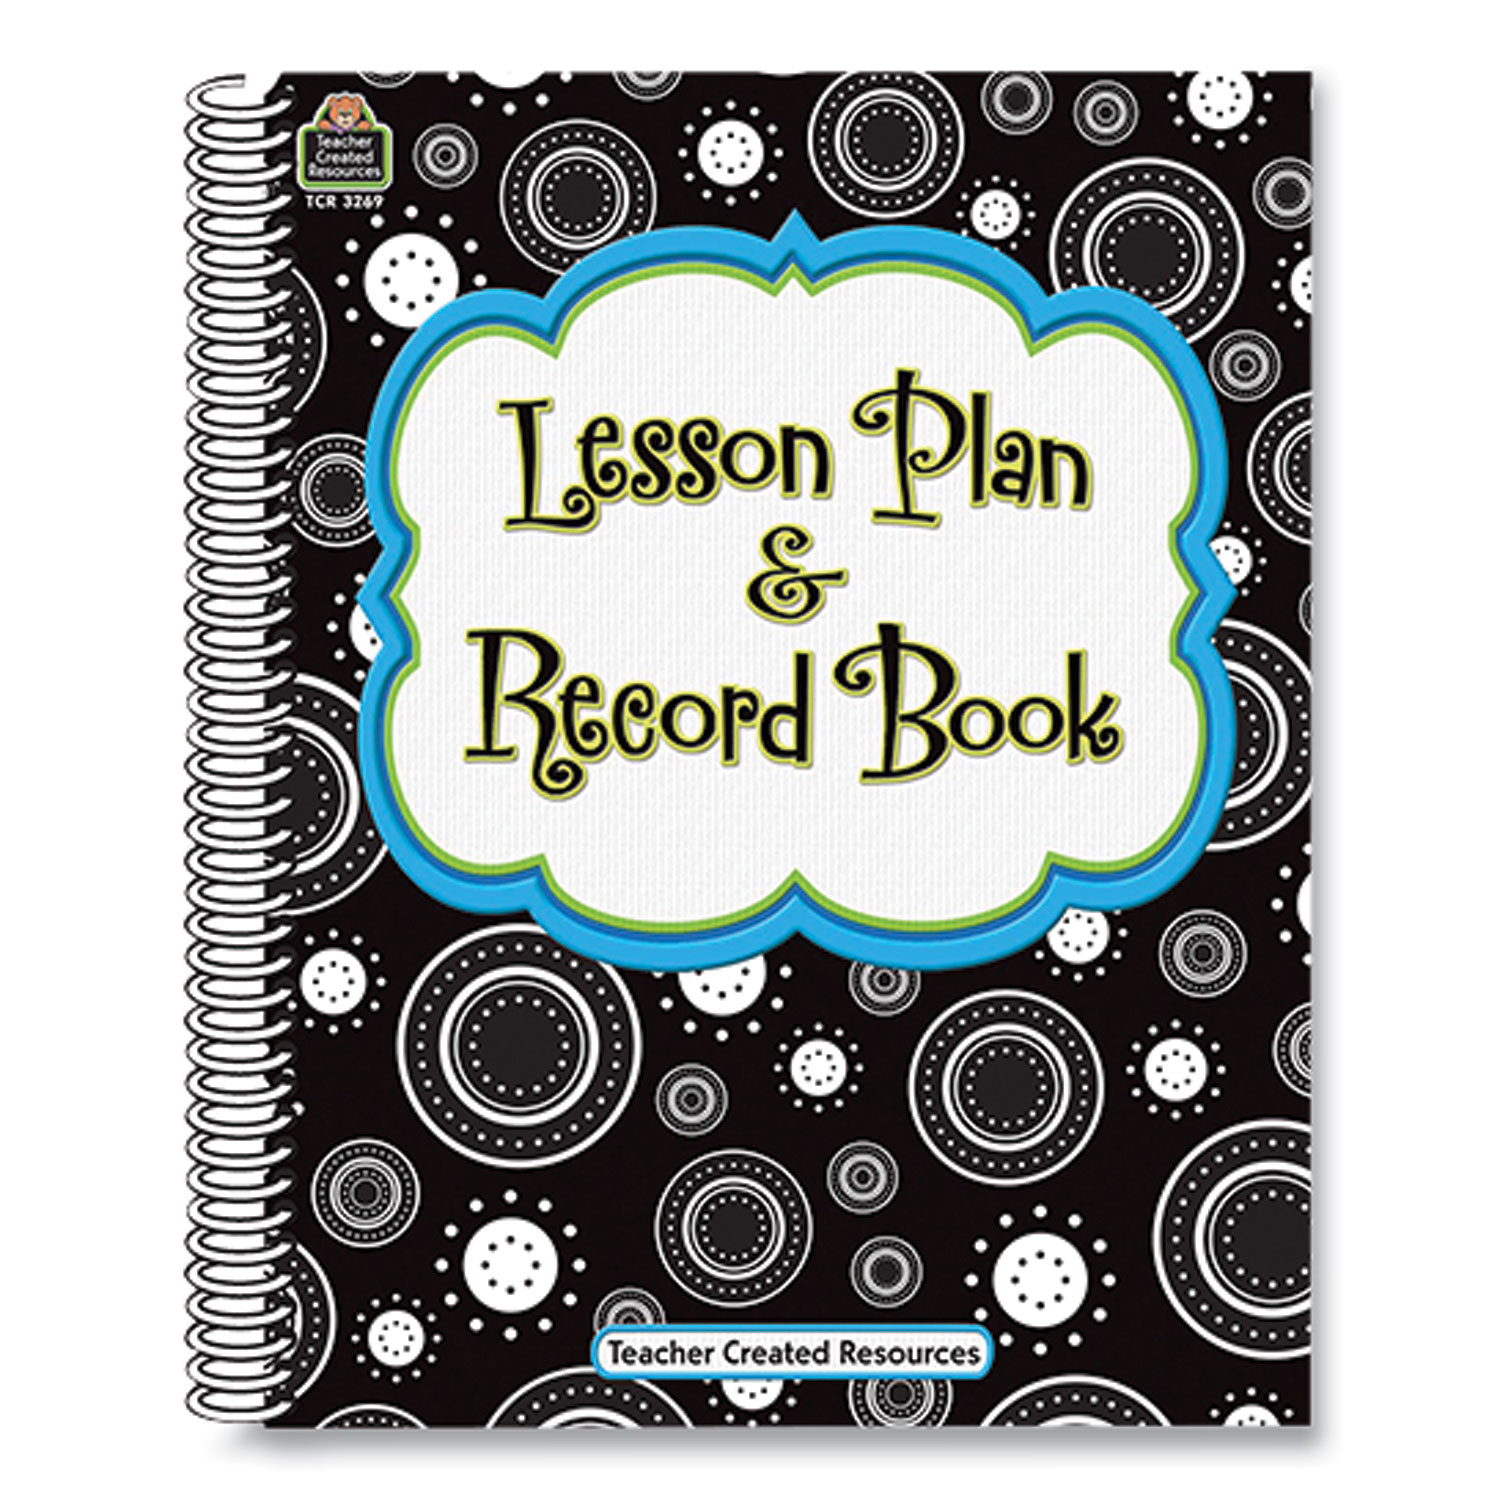  Teacher Created Resources TCR3269 Crazy Circles Lesson Plan and Record Book, 11 x 8.5, 160 Pages (TCR1609950) 